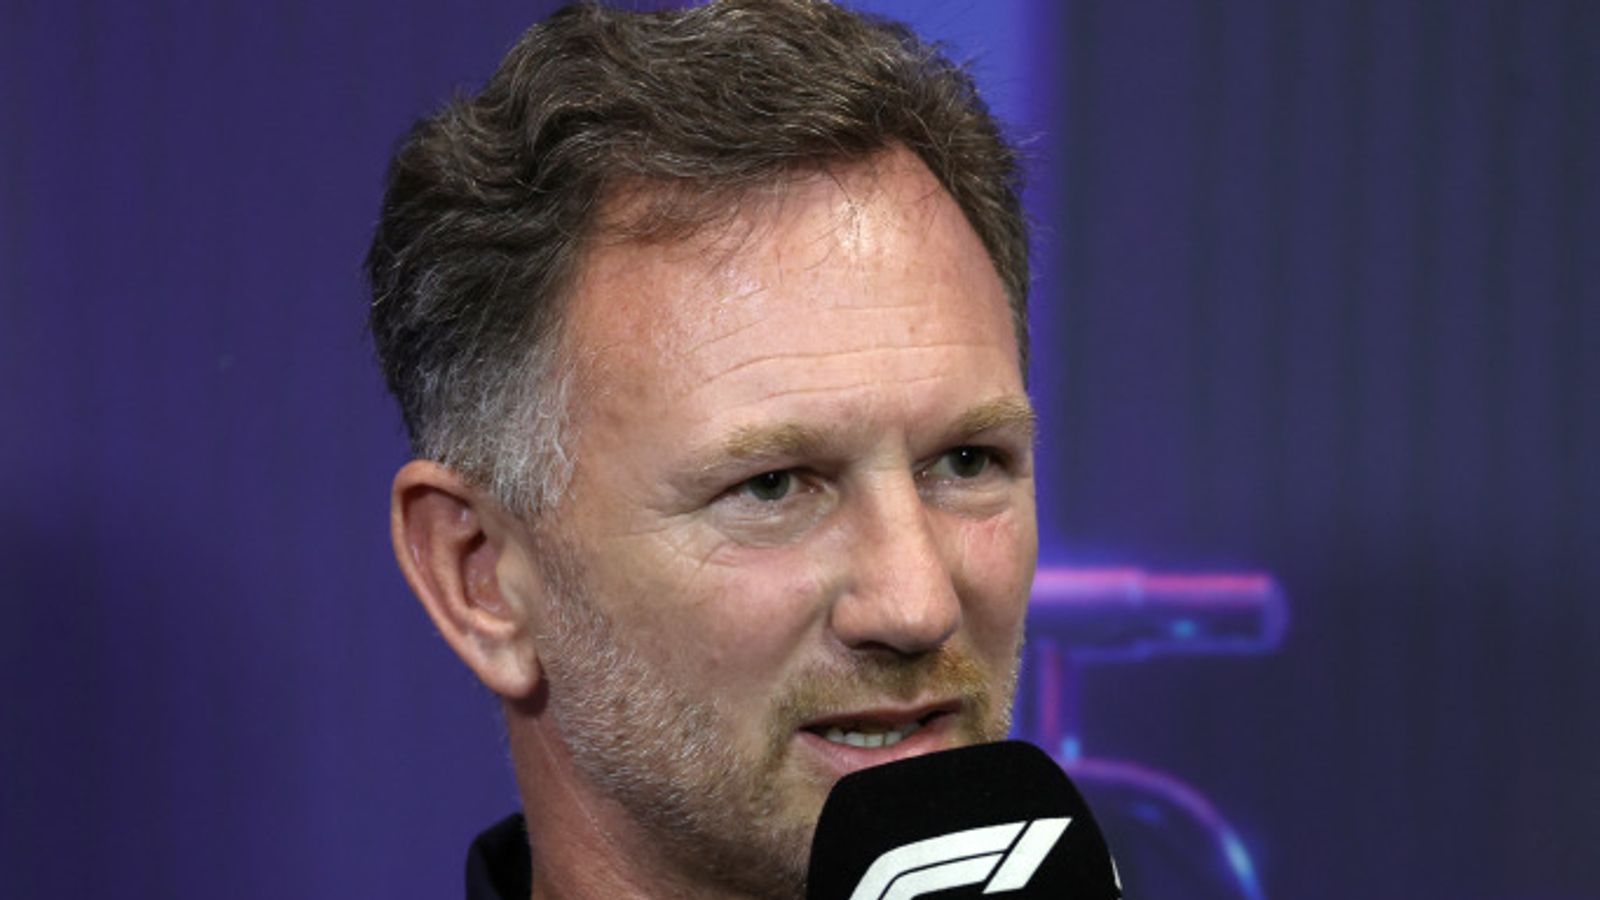 Red Bull boss Christian Horner hits out at rivals over F1 budget cap speculation